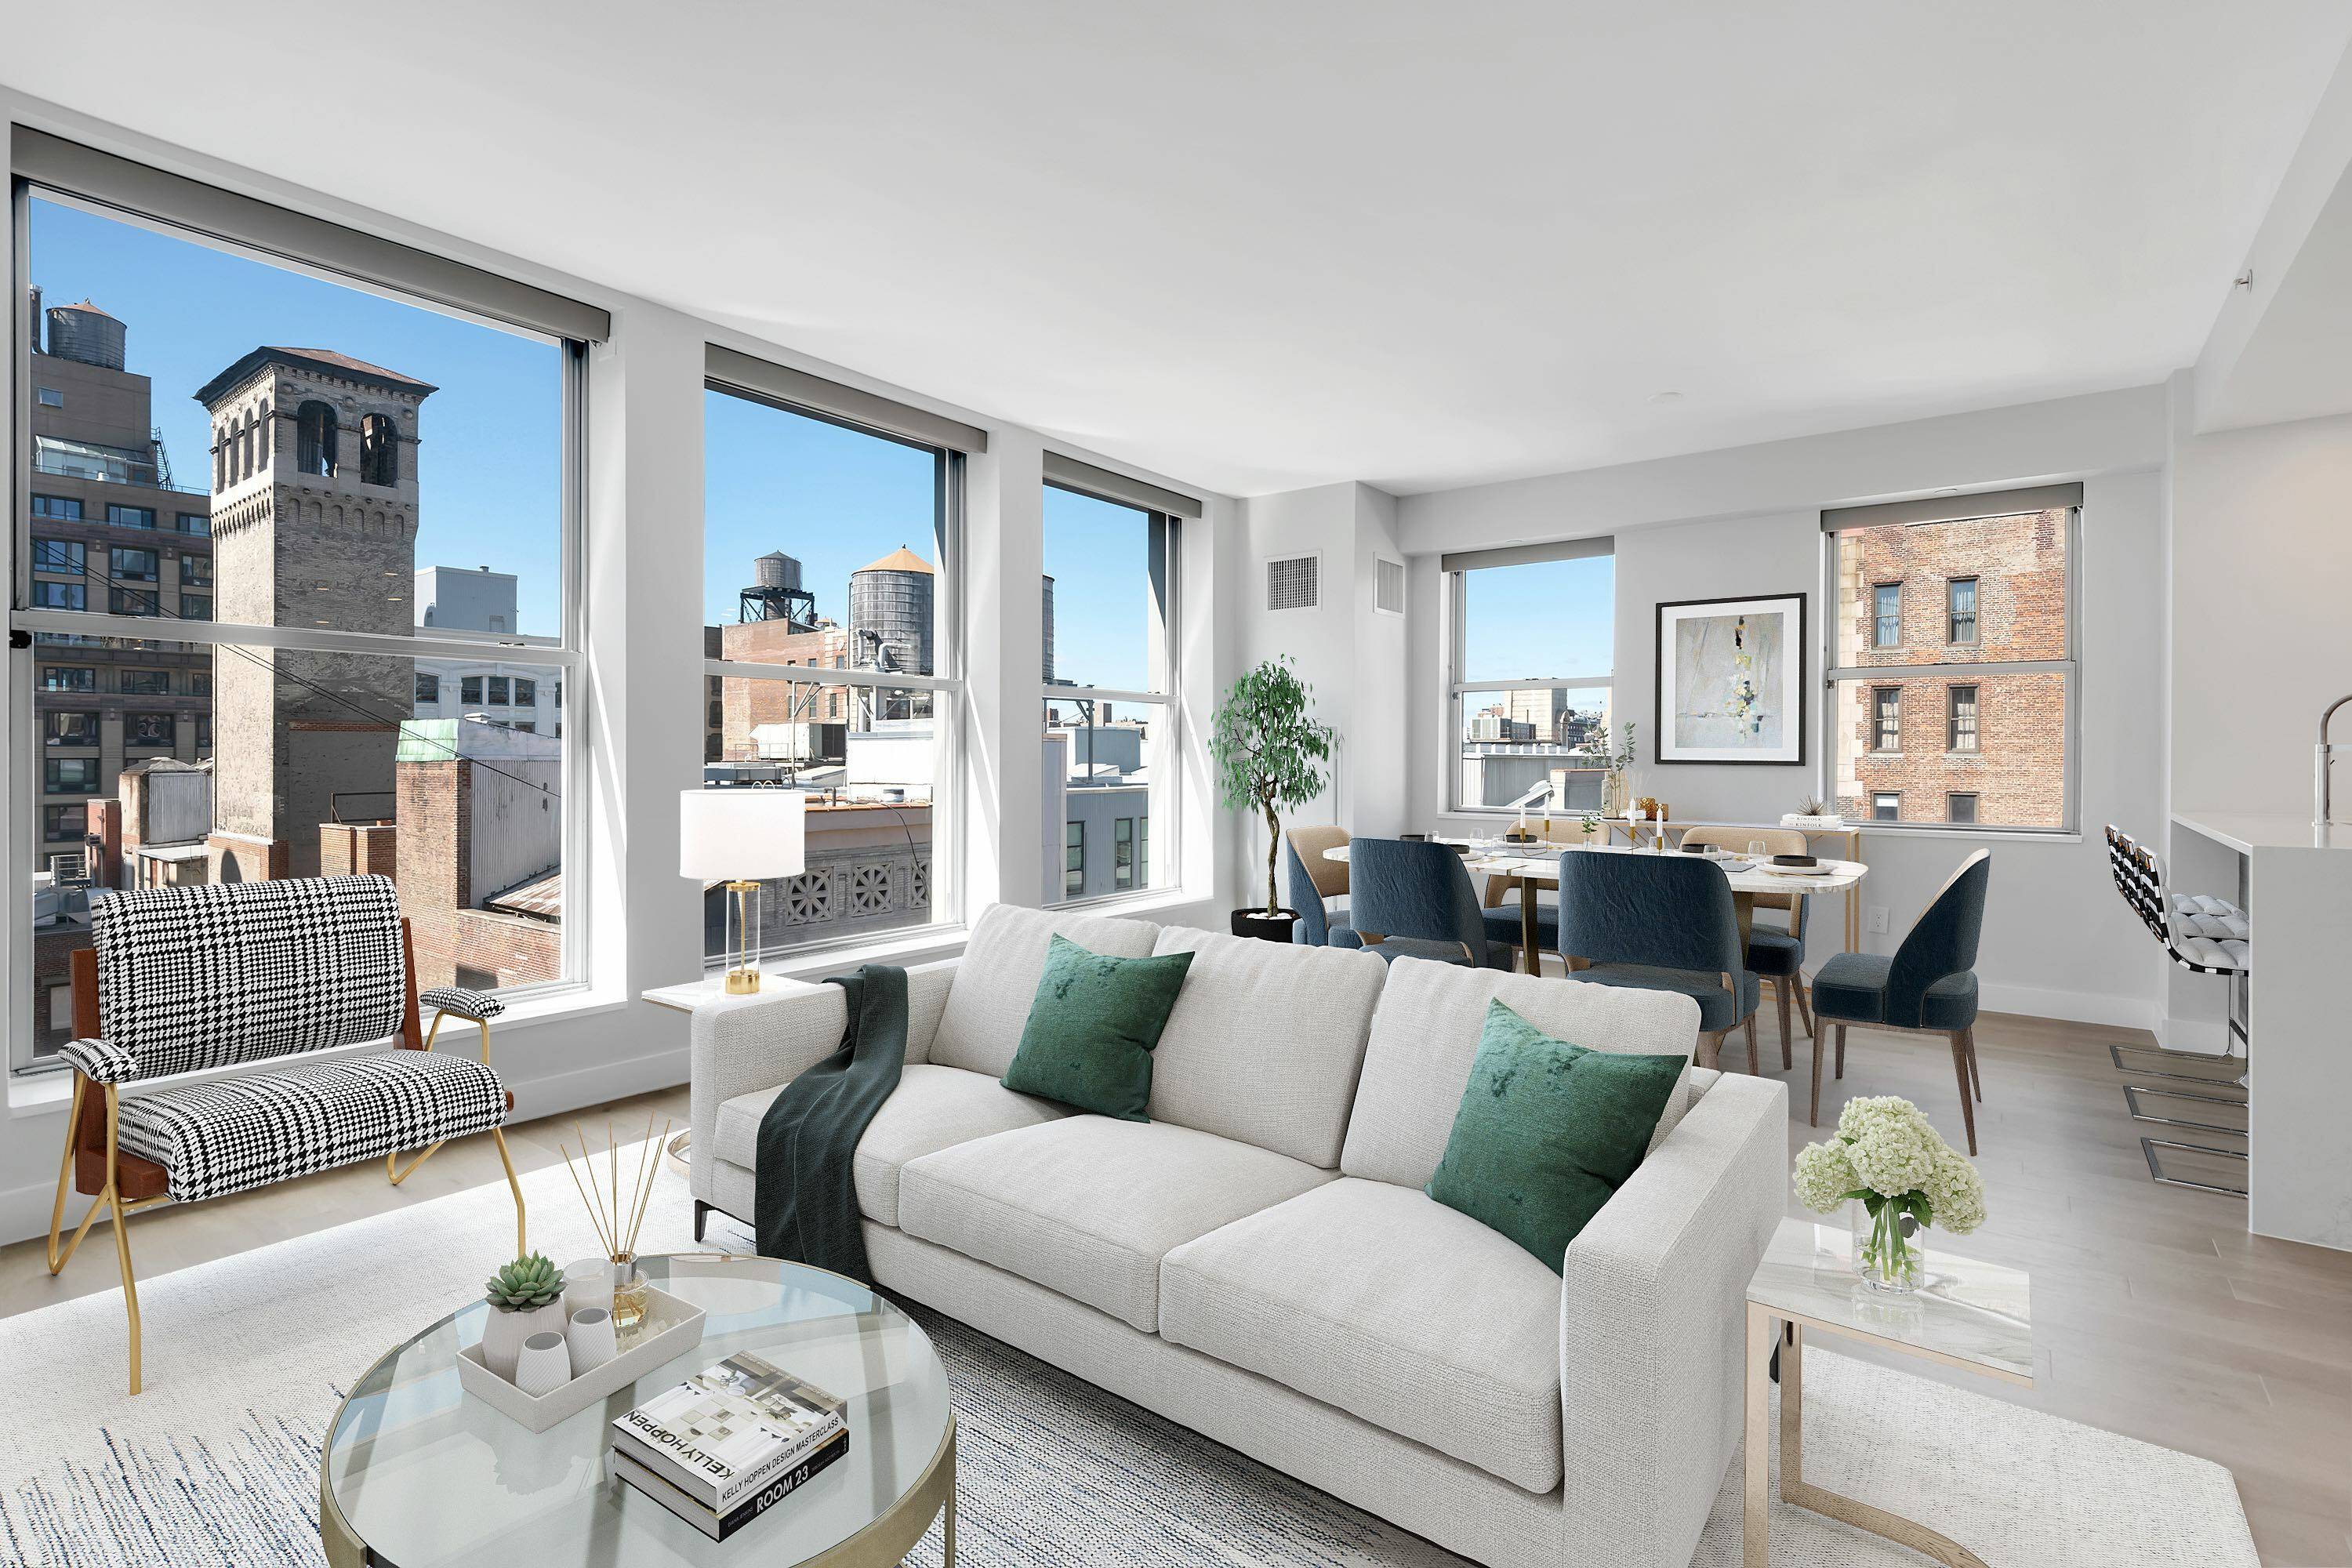 Exit from your own private elevator entrance into this full floor modern loft complete with south facing views of the charming Flatiron neighborhood.